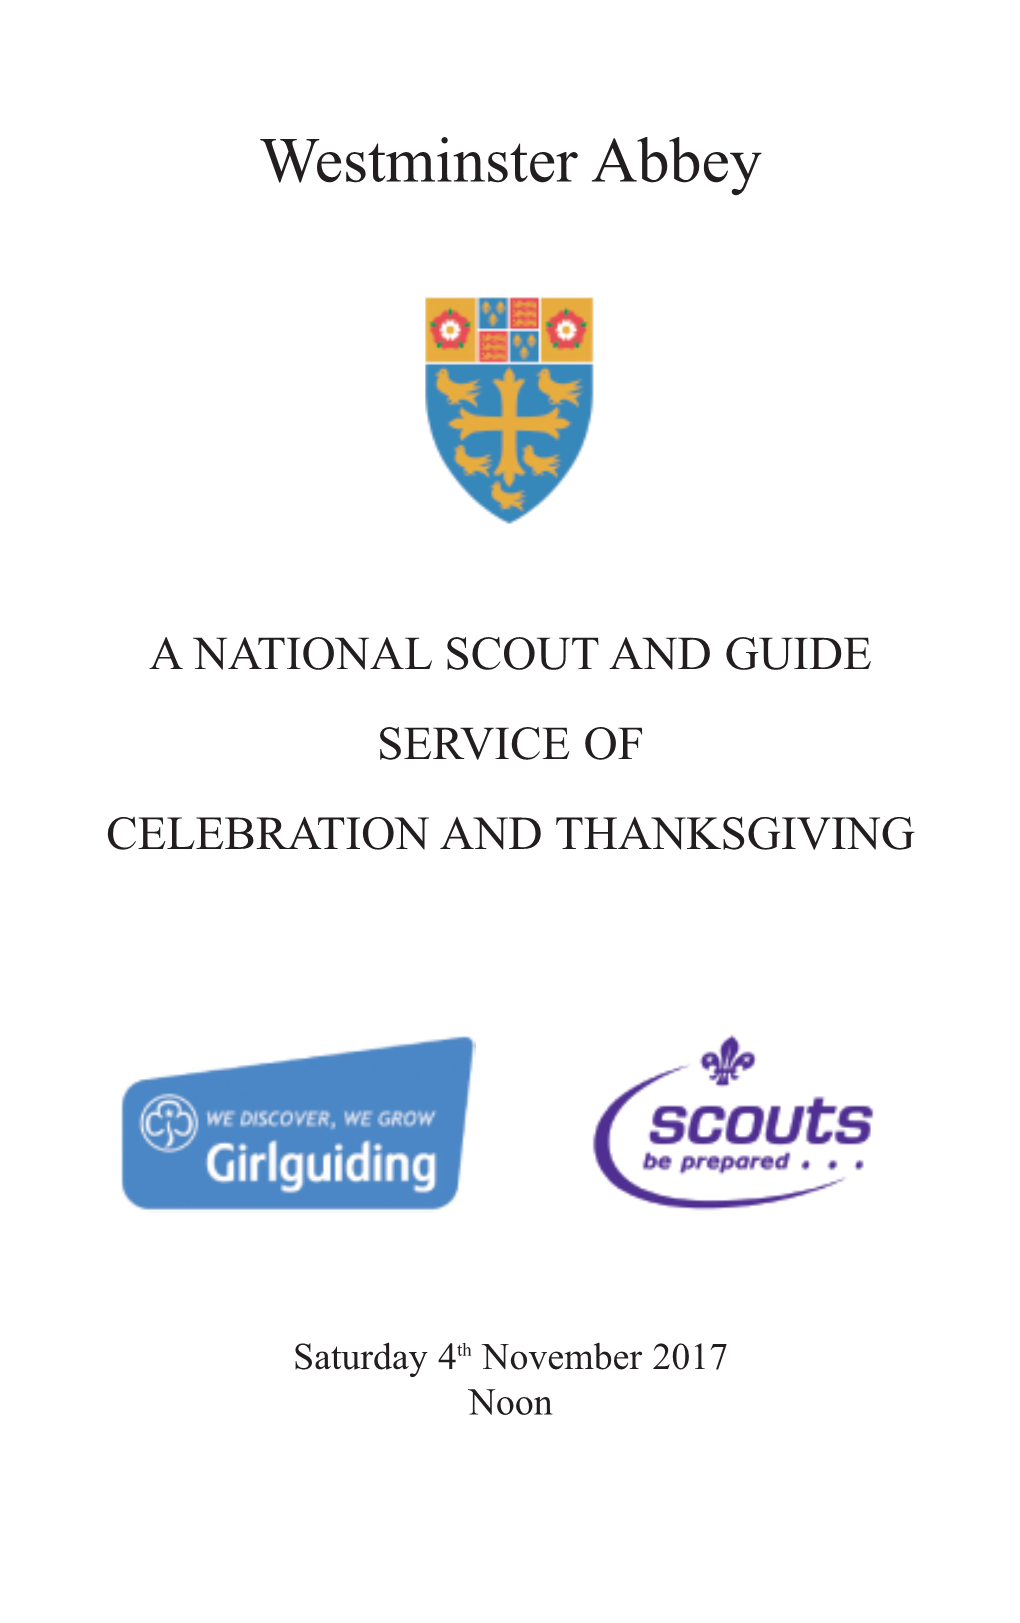 A National Scout and Guide Service of Celebration and Thanksgiving